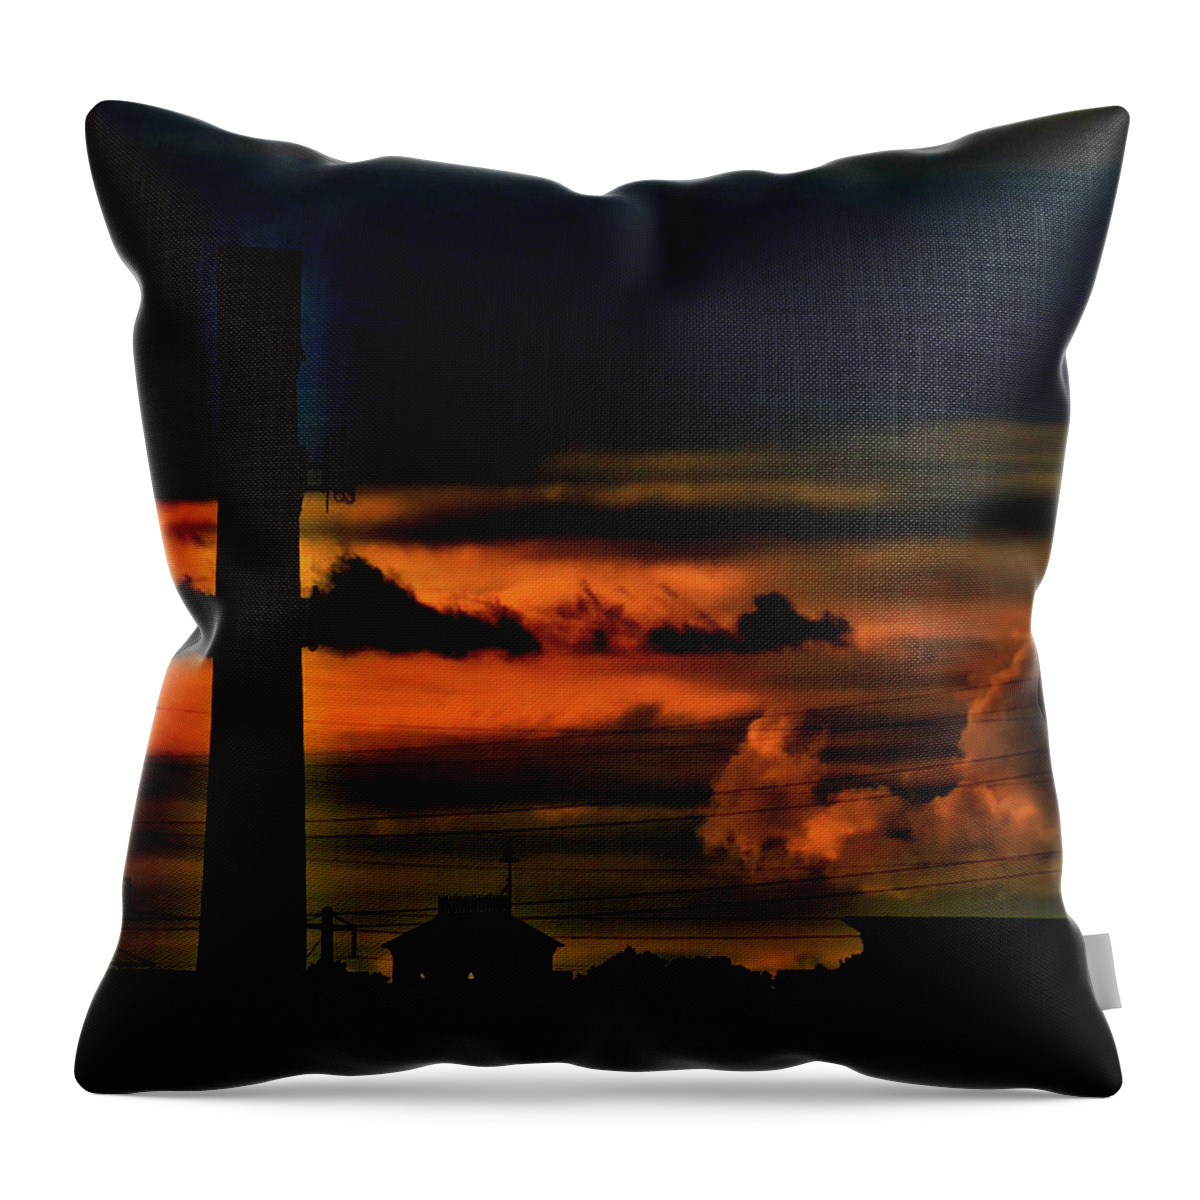 Industrial Throw Pillow featuring the photograph Industrial Landscape at Sundown by Linda Stern